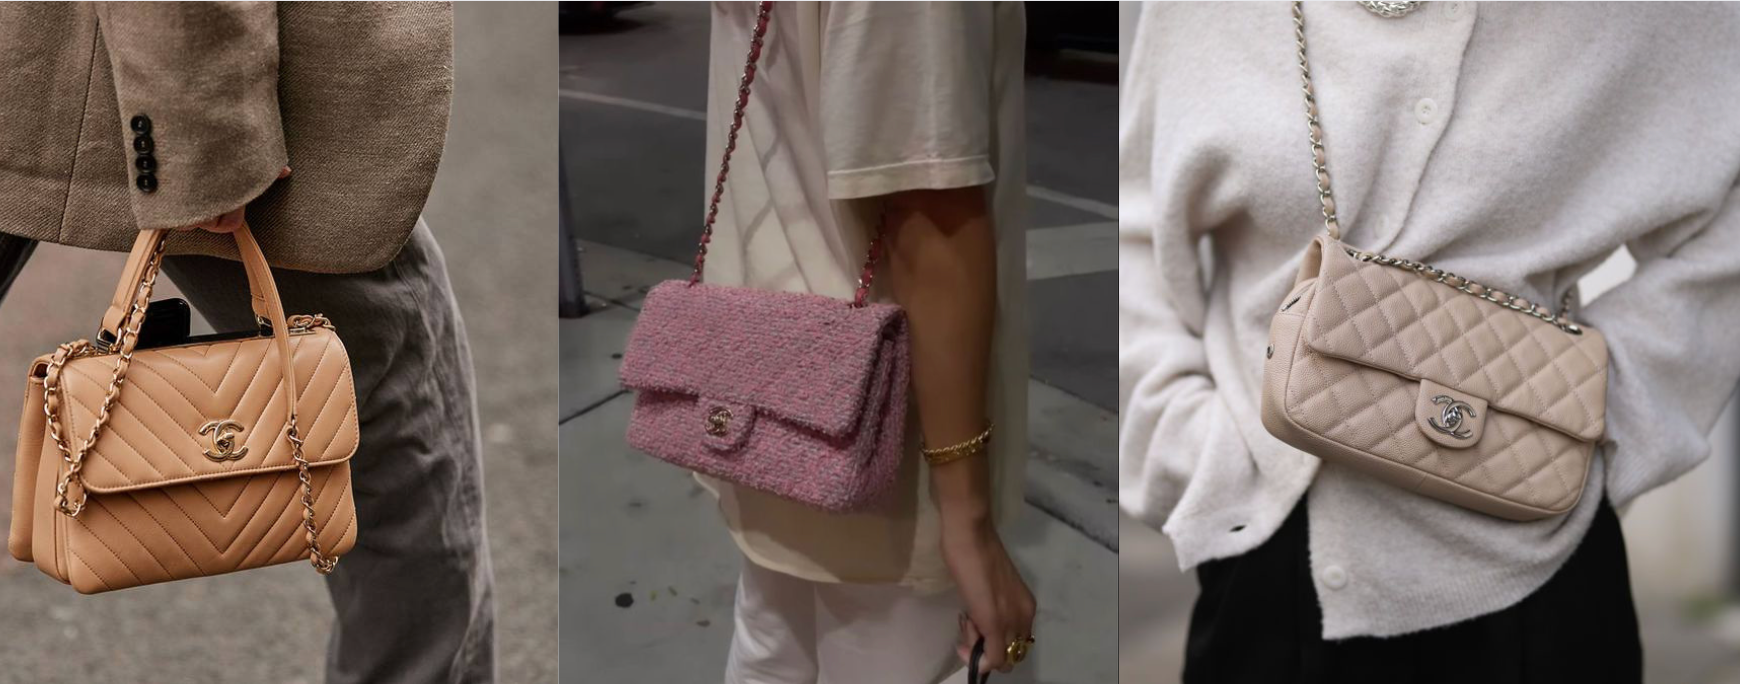 5 Steps to Authenticating a Chanel Bag